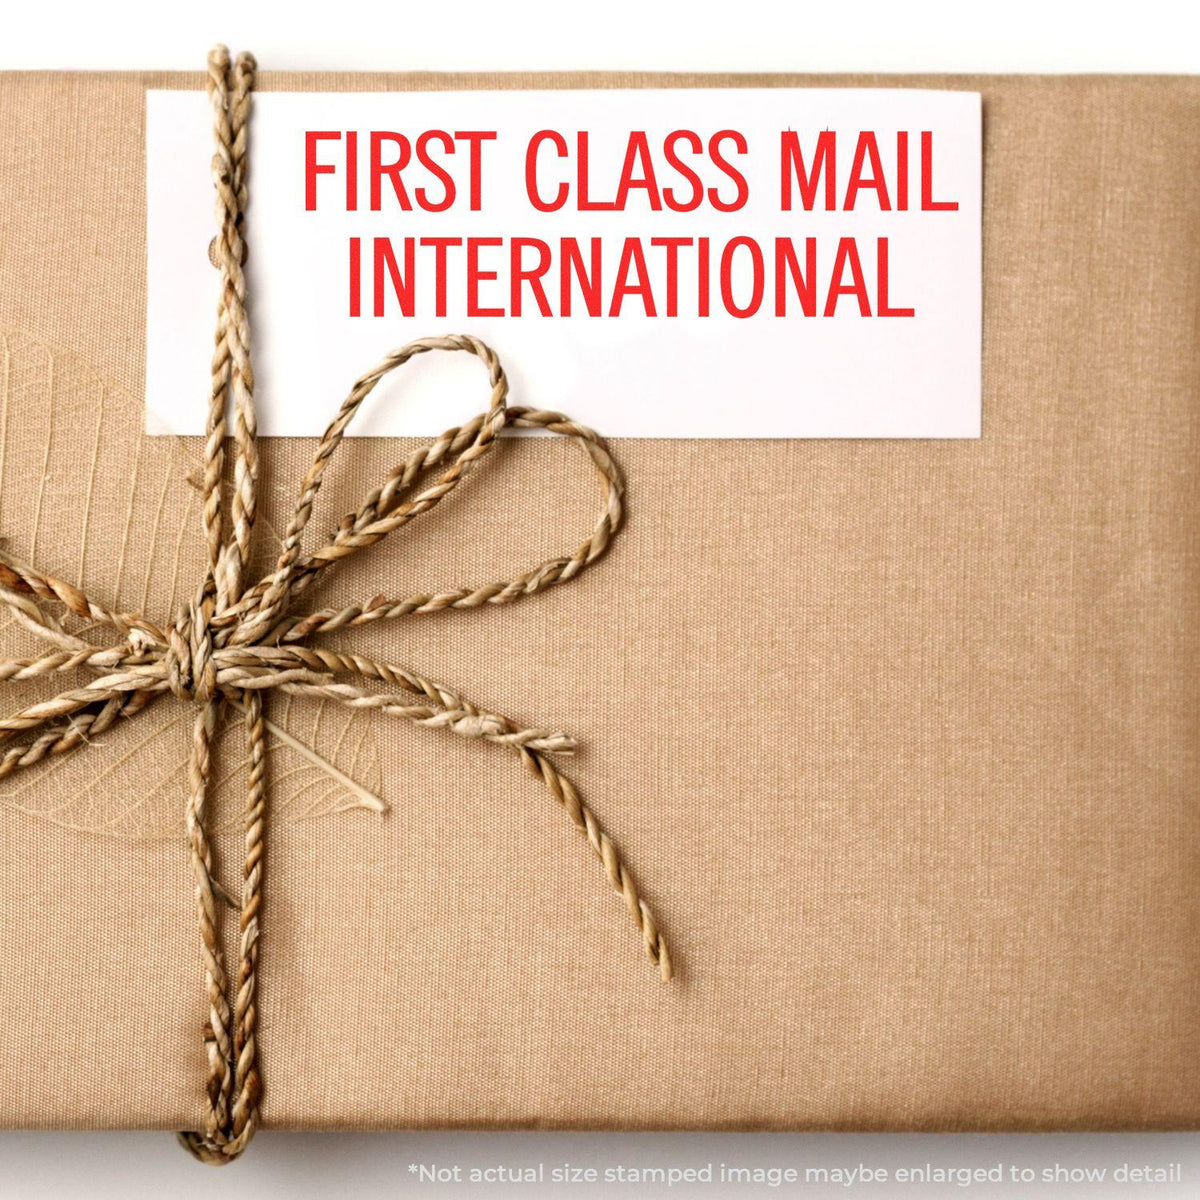 In Use Large First Class Mail International Rubber Stamp Image